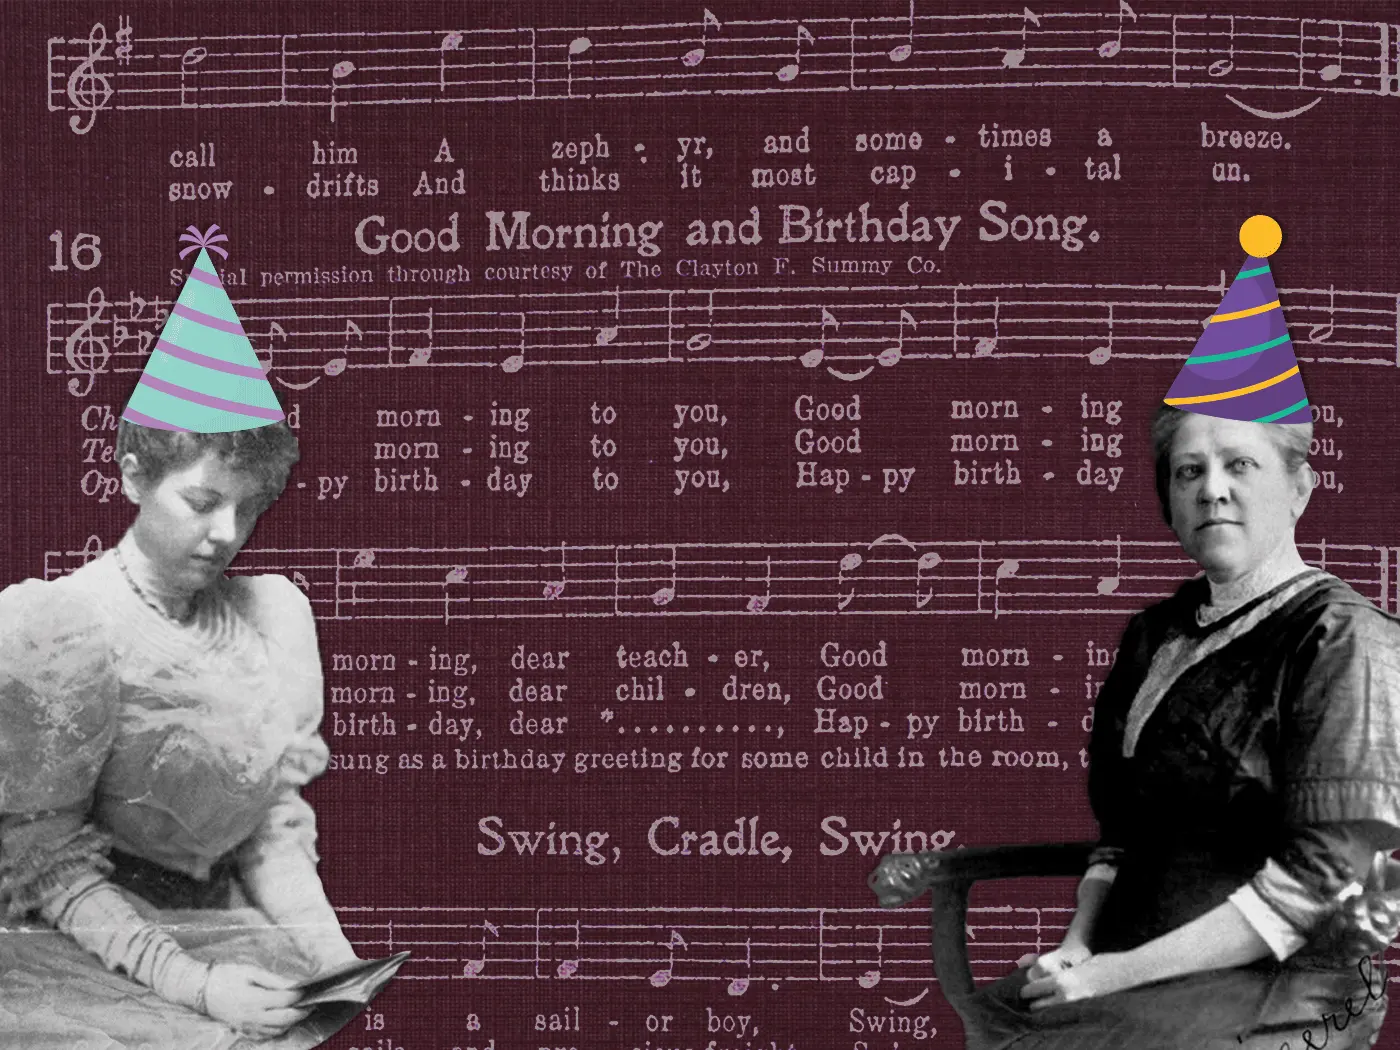 &ldquo;Happy Birthday&rdquo; may be the Hill sisters&#39; main claim to fame, but Patty (left) and Mildred&#39;s (right) impact on American history extends far beyond the beloved song.